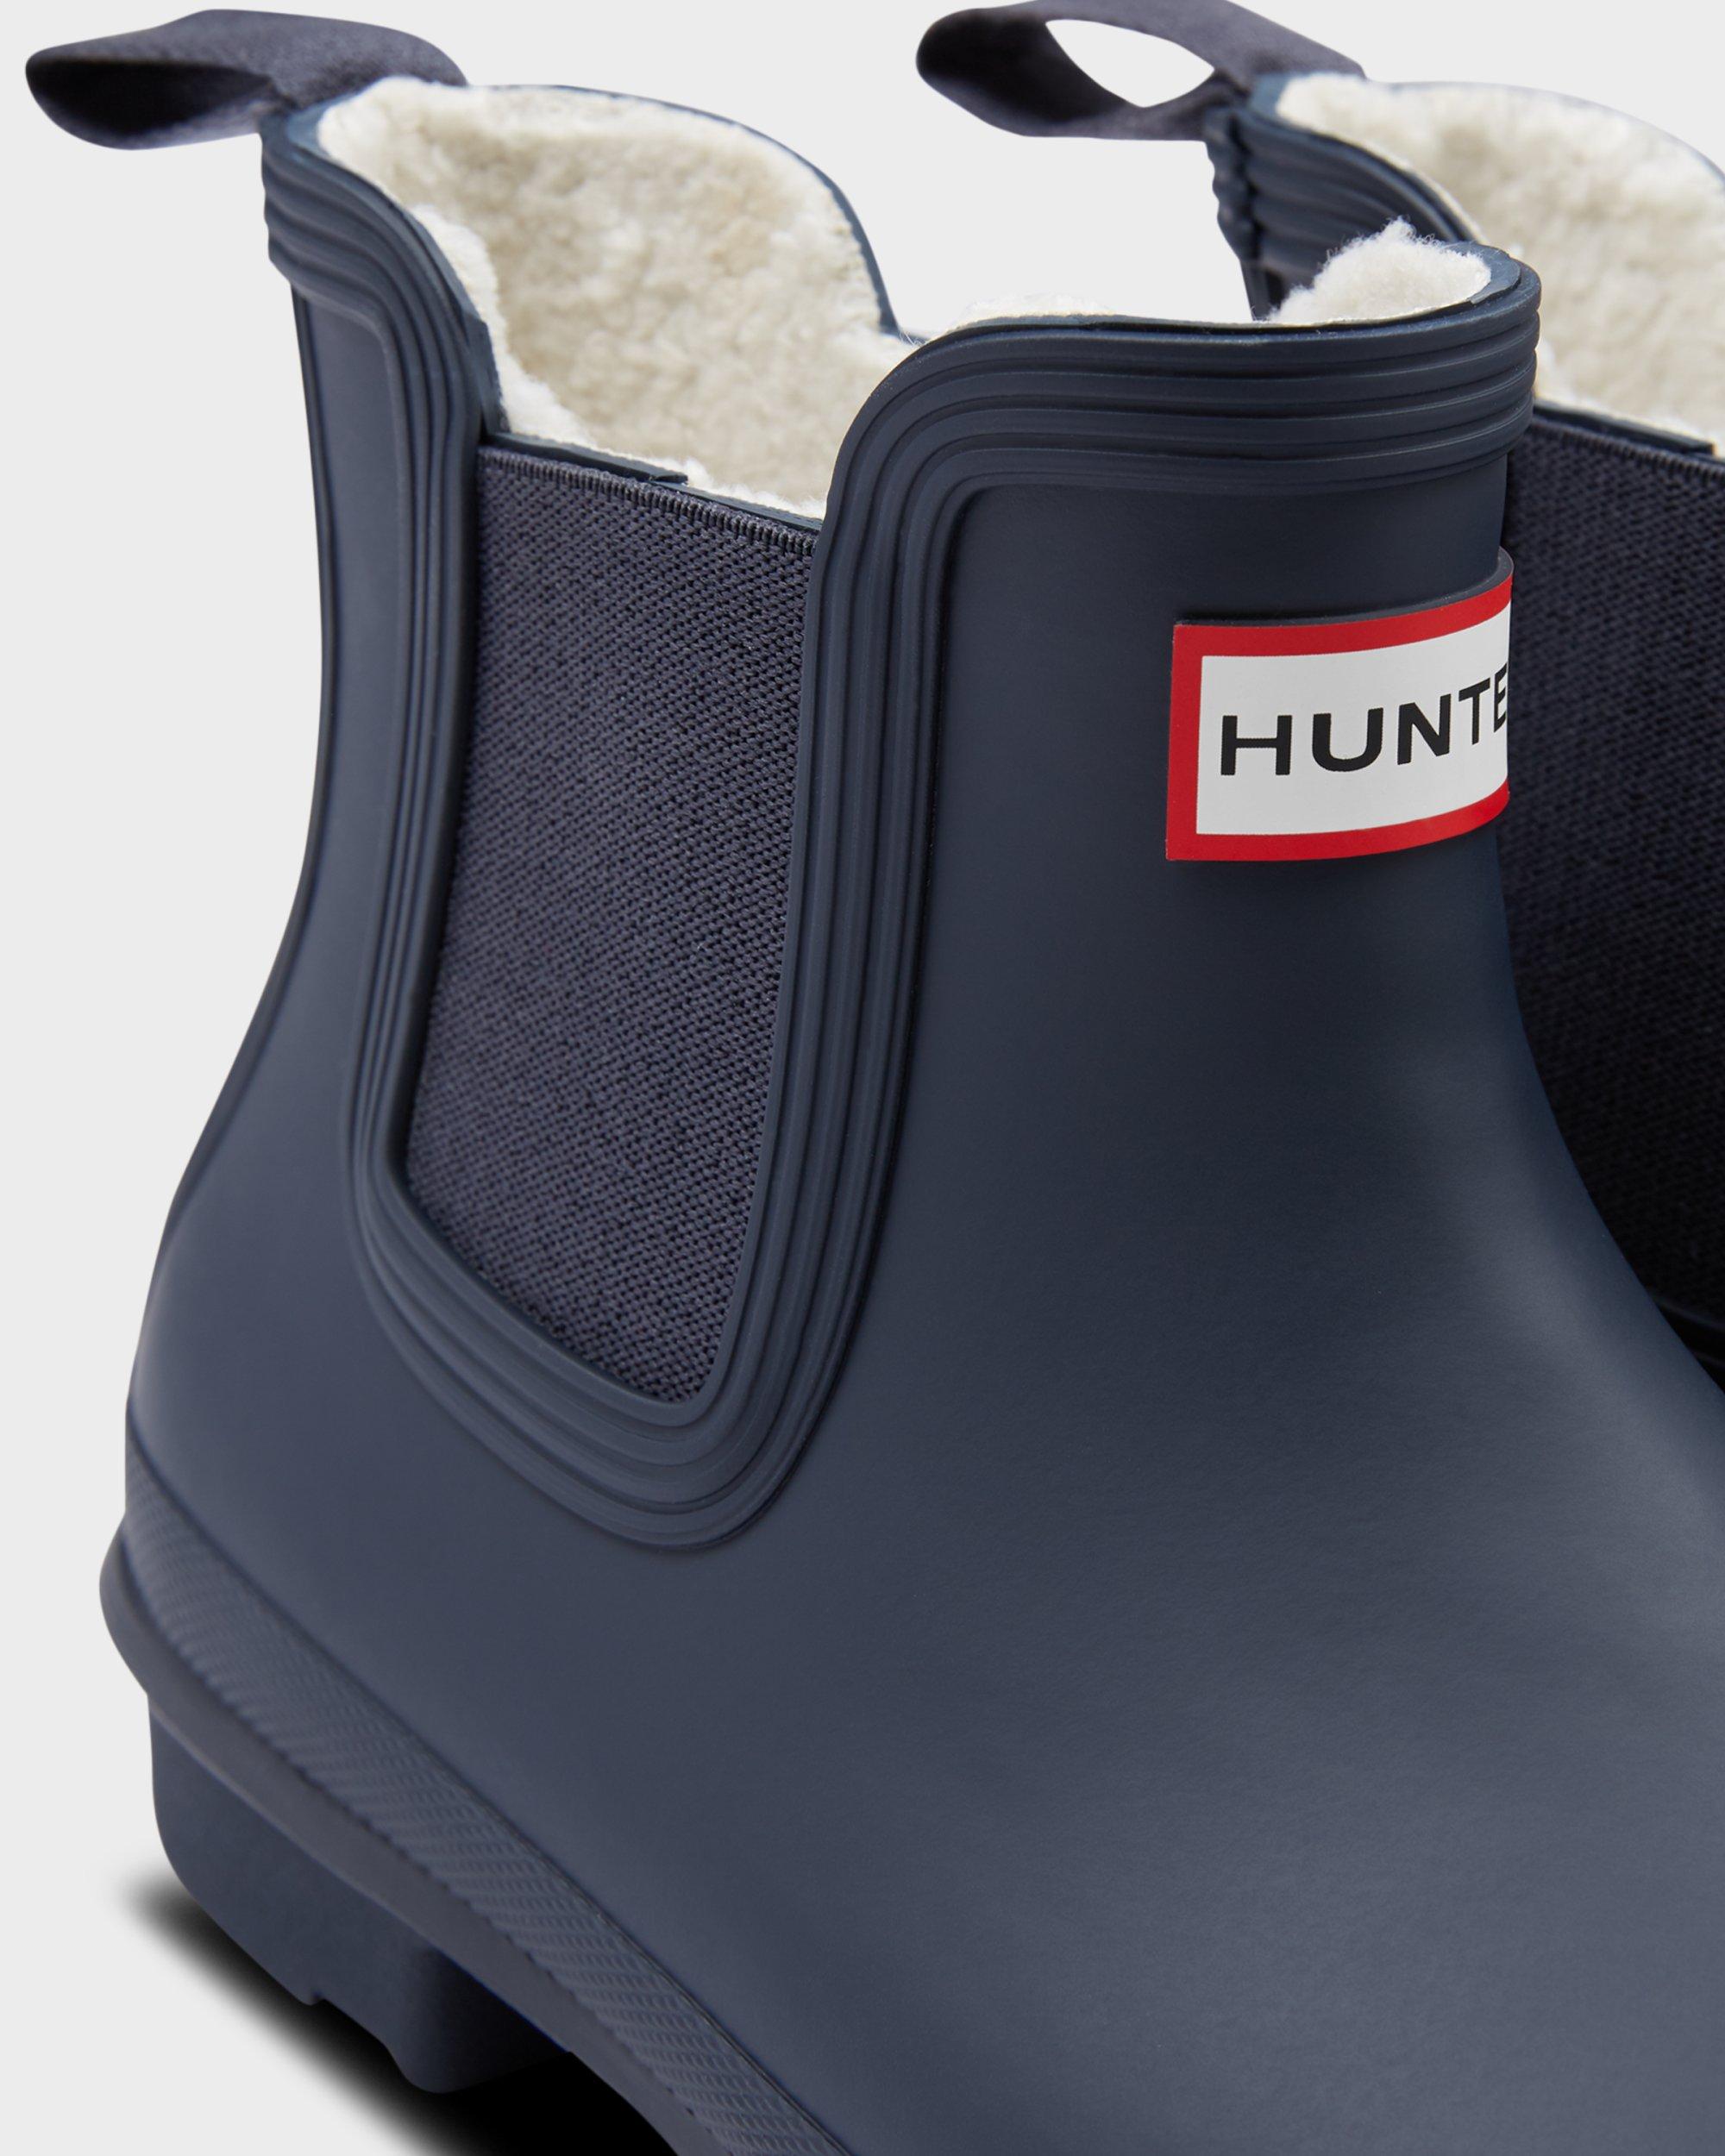 HUNTER Fleece Insulated Chelsea Boots in Navy (Blue) - Lyst